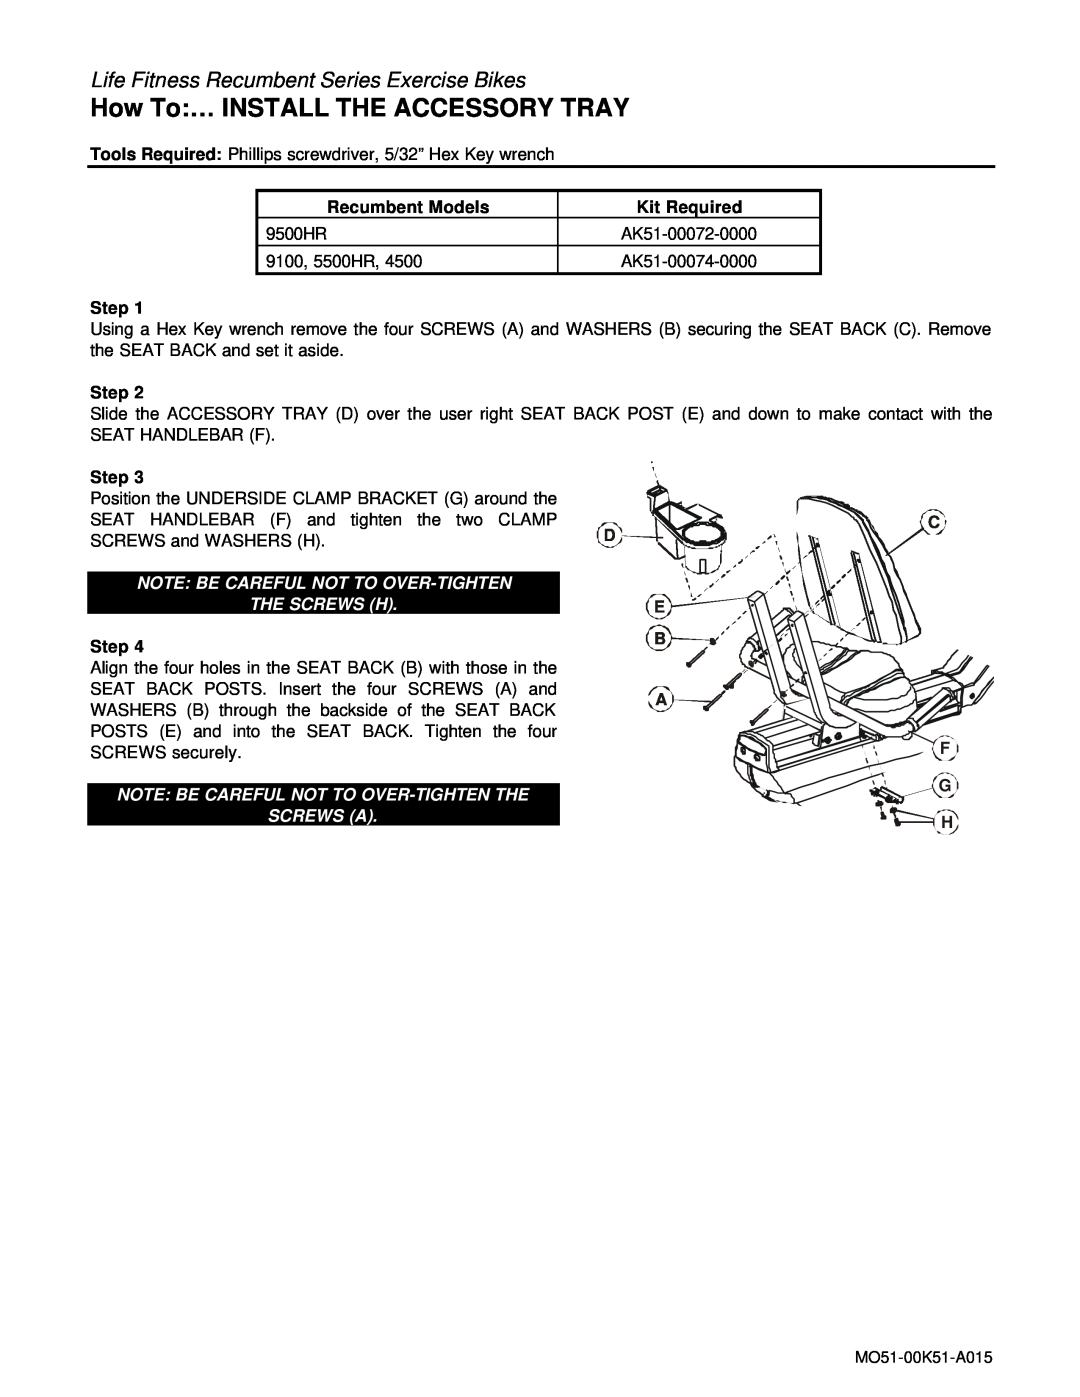 Philips MO51-00K51-A015 manual How To… INSTALL THE ACCESSORY TRAY, Life Fitness Recumbent Series Exercise Bikes, Step 